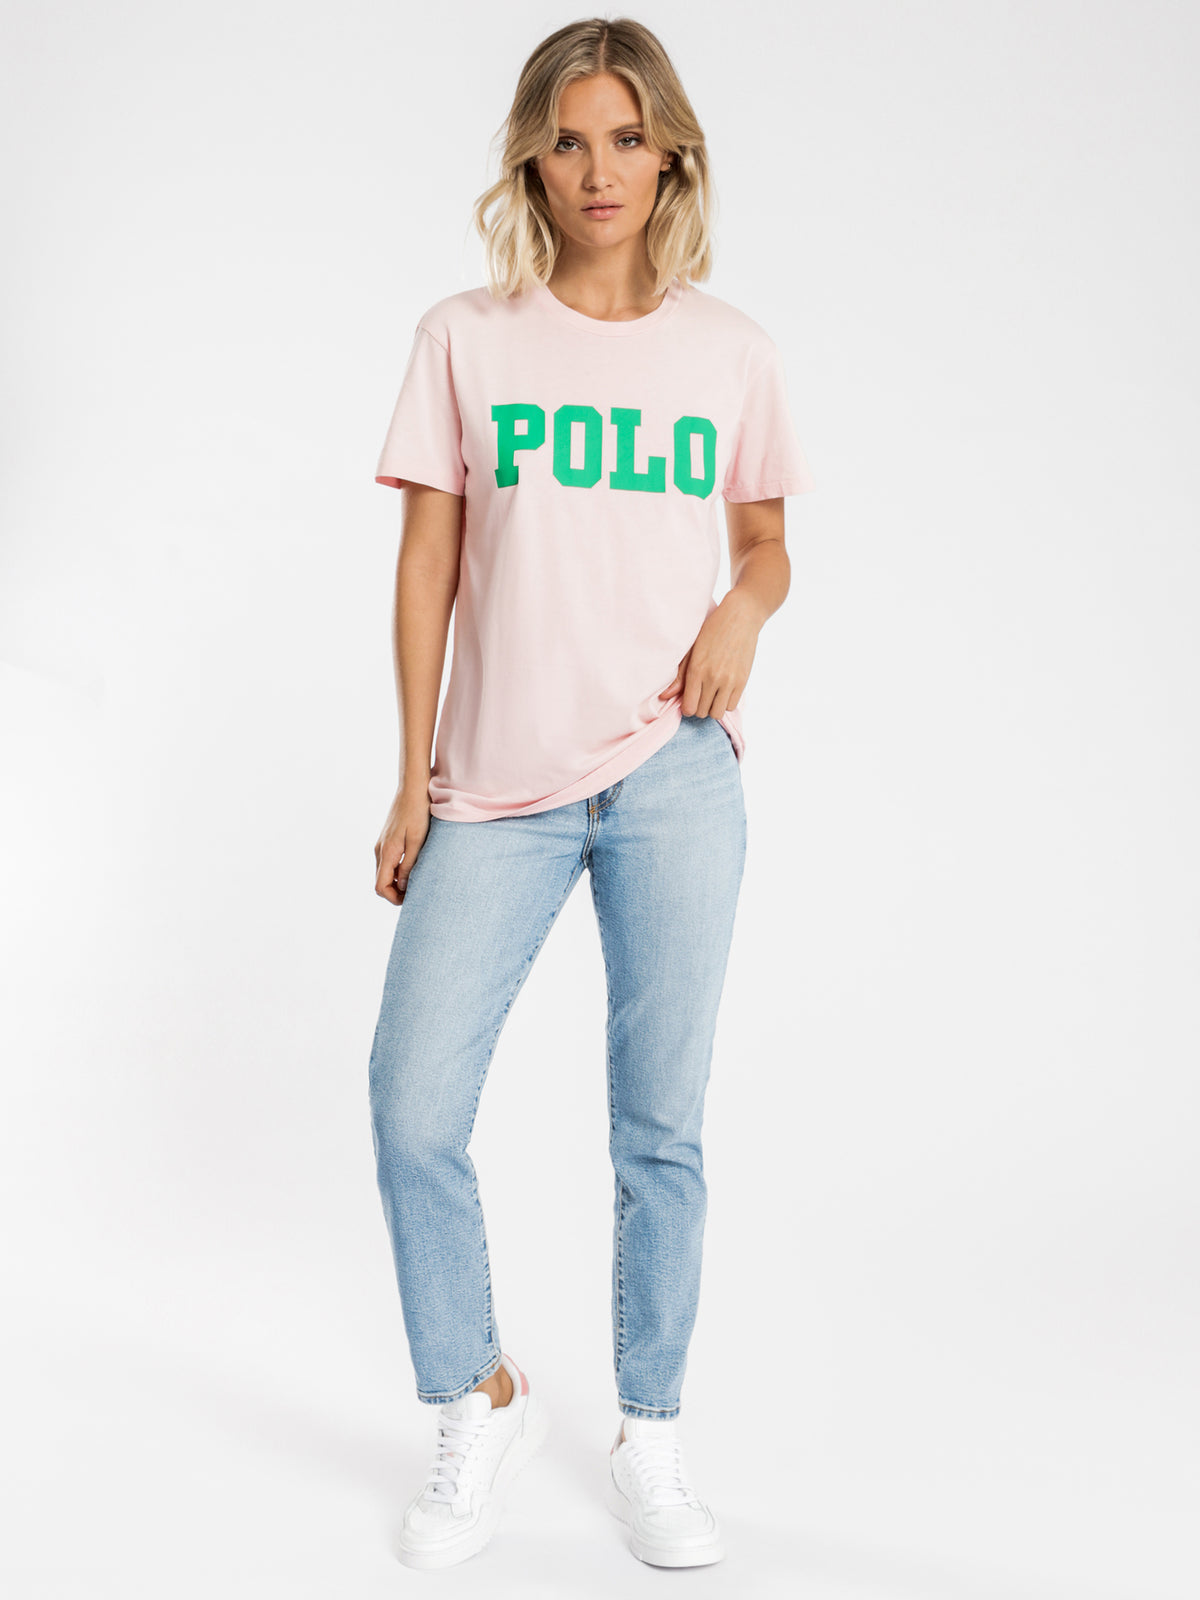 Big Polo Logo T-Shirt in Pink Sand